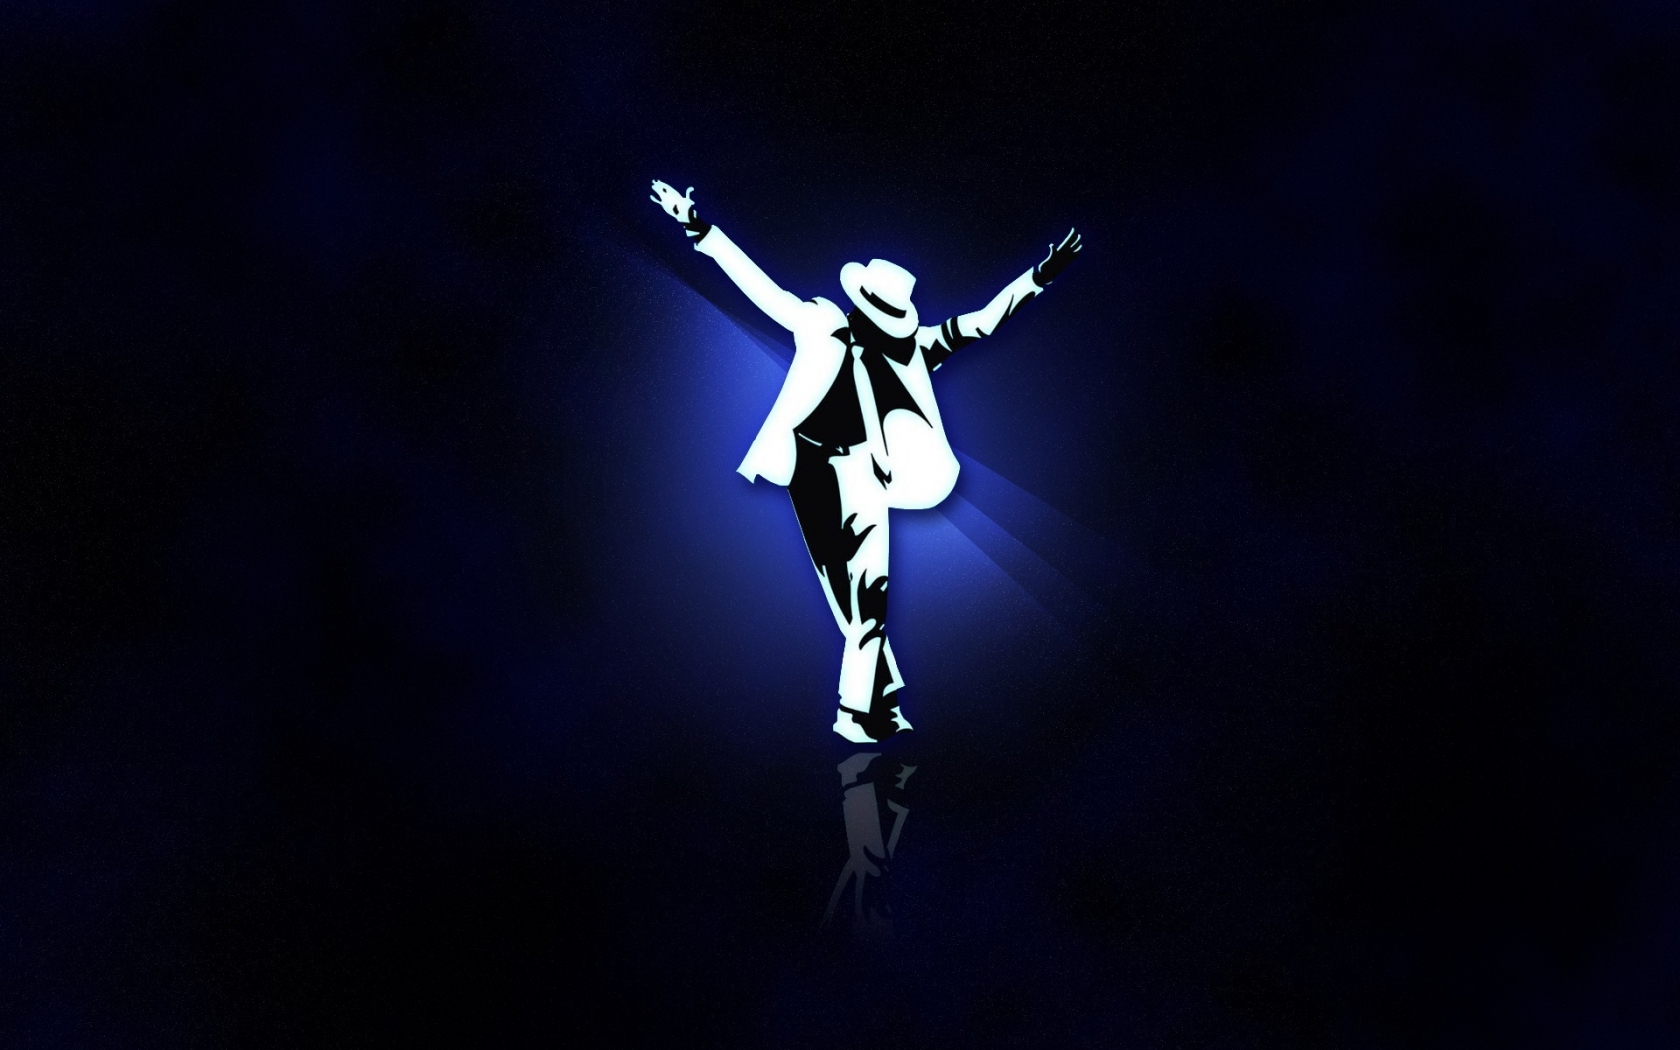 Michael Jackson Tribute for 1680 x 1050 widescreen resolution